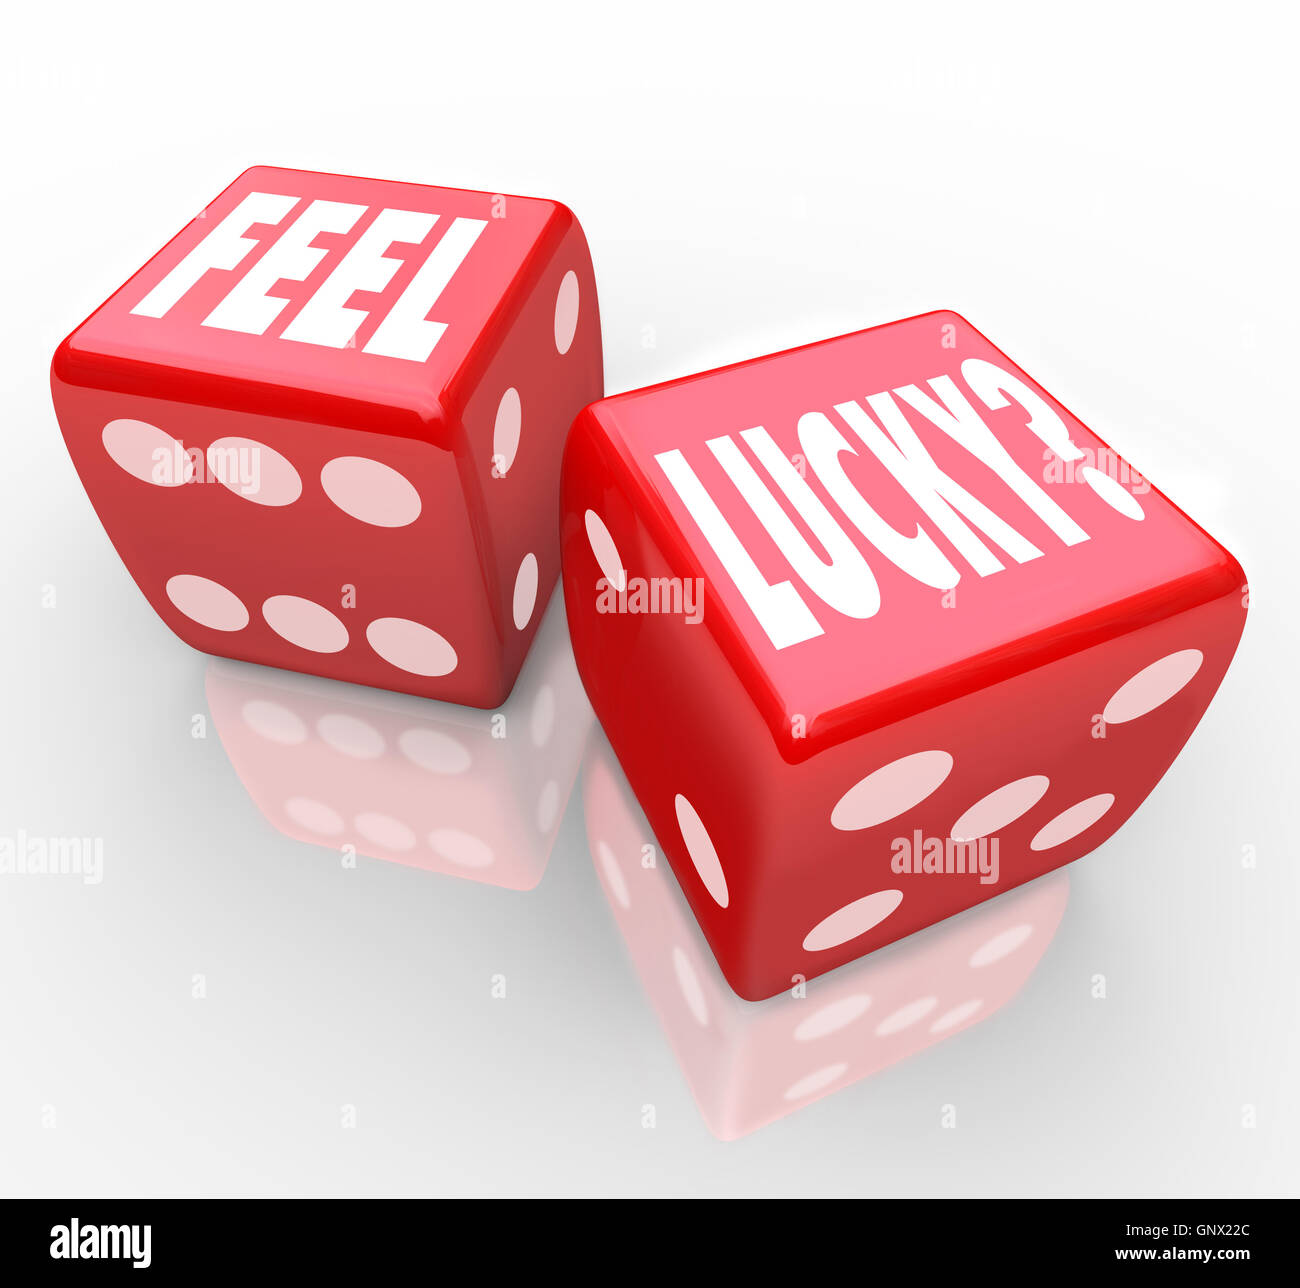 Feel Lucky Question on Dice Winning Confidence Stock Photo